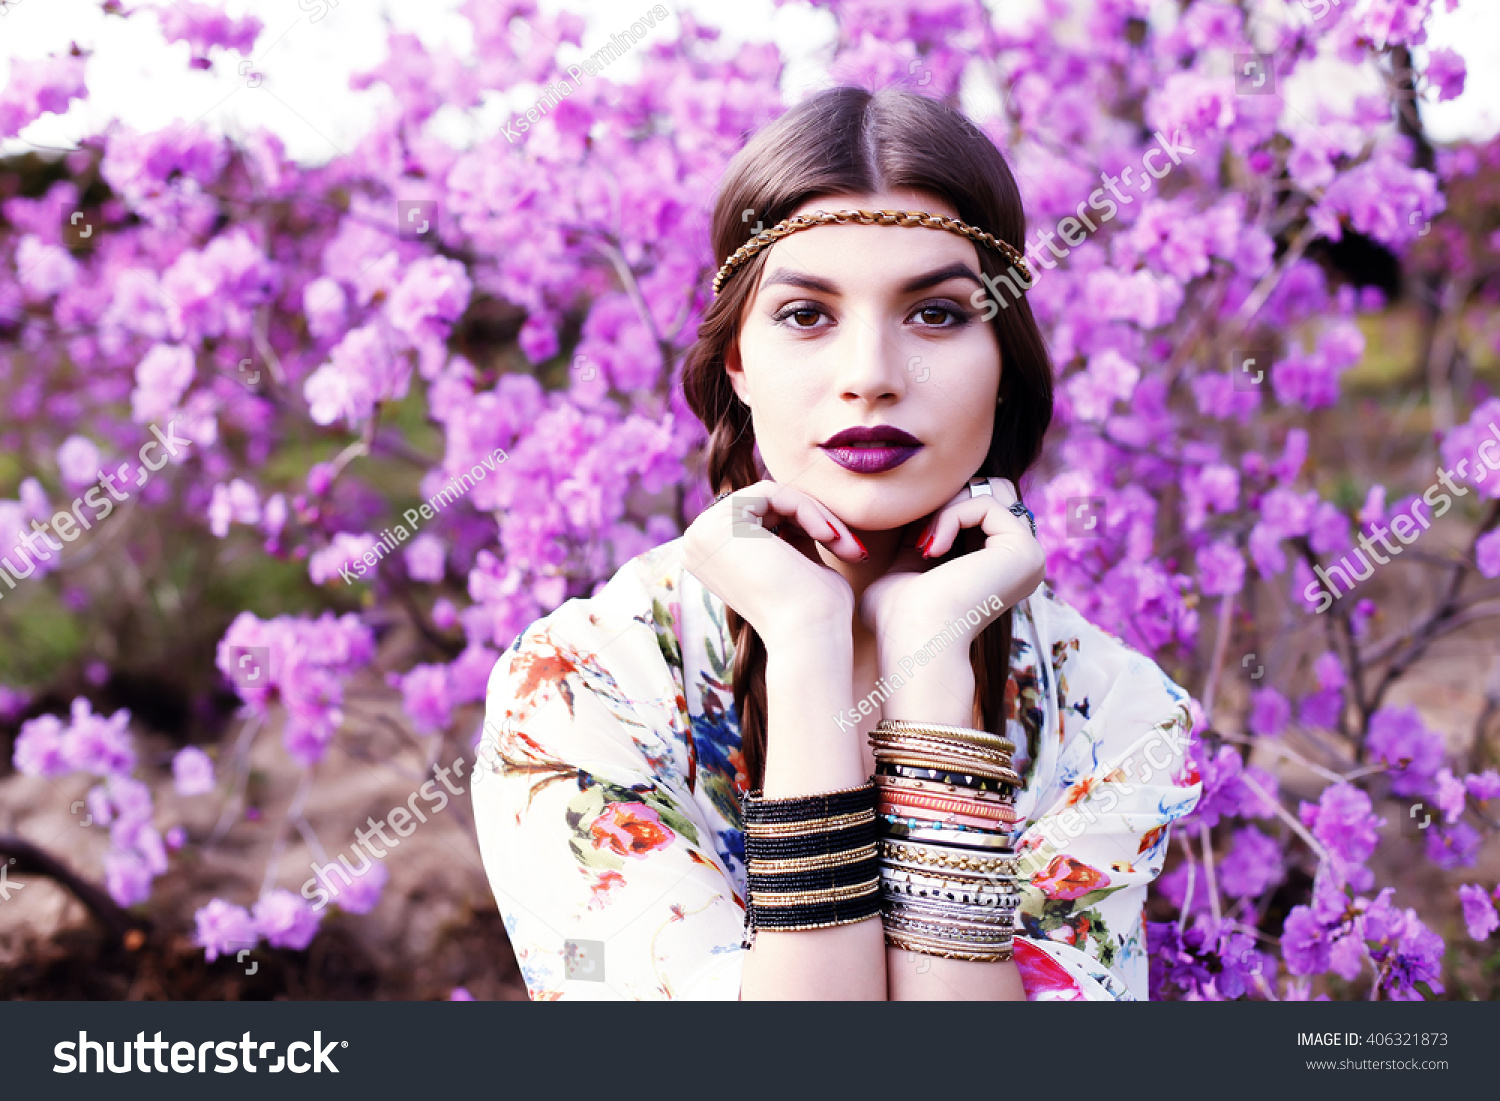 Outdoor high fashion portrait of young woman model, posing with trendy accessories and boho chic clothes. Fashion blogger outfit close up. Street style concept photo toned style instagram filters #406321873